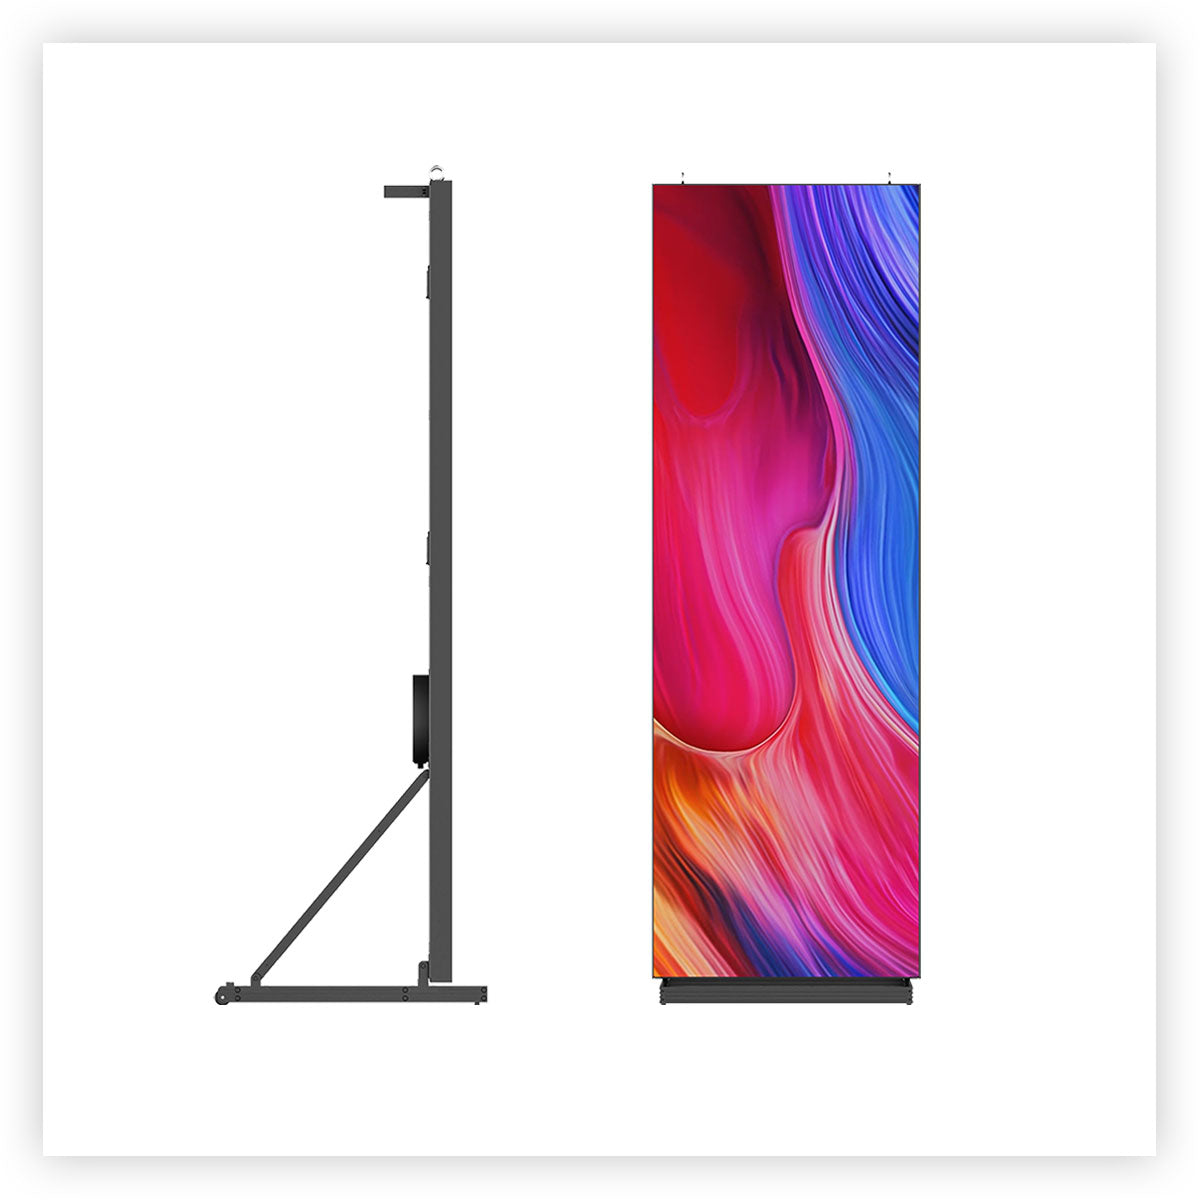 AdSpire Indoor LED Poster 25.2"x75.6" P2mm